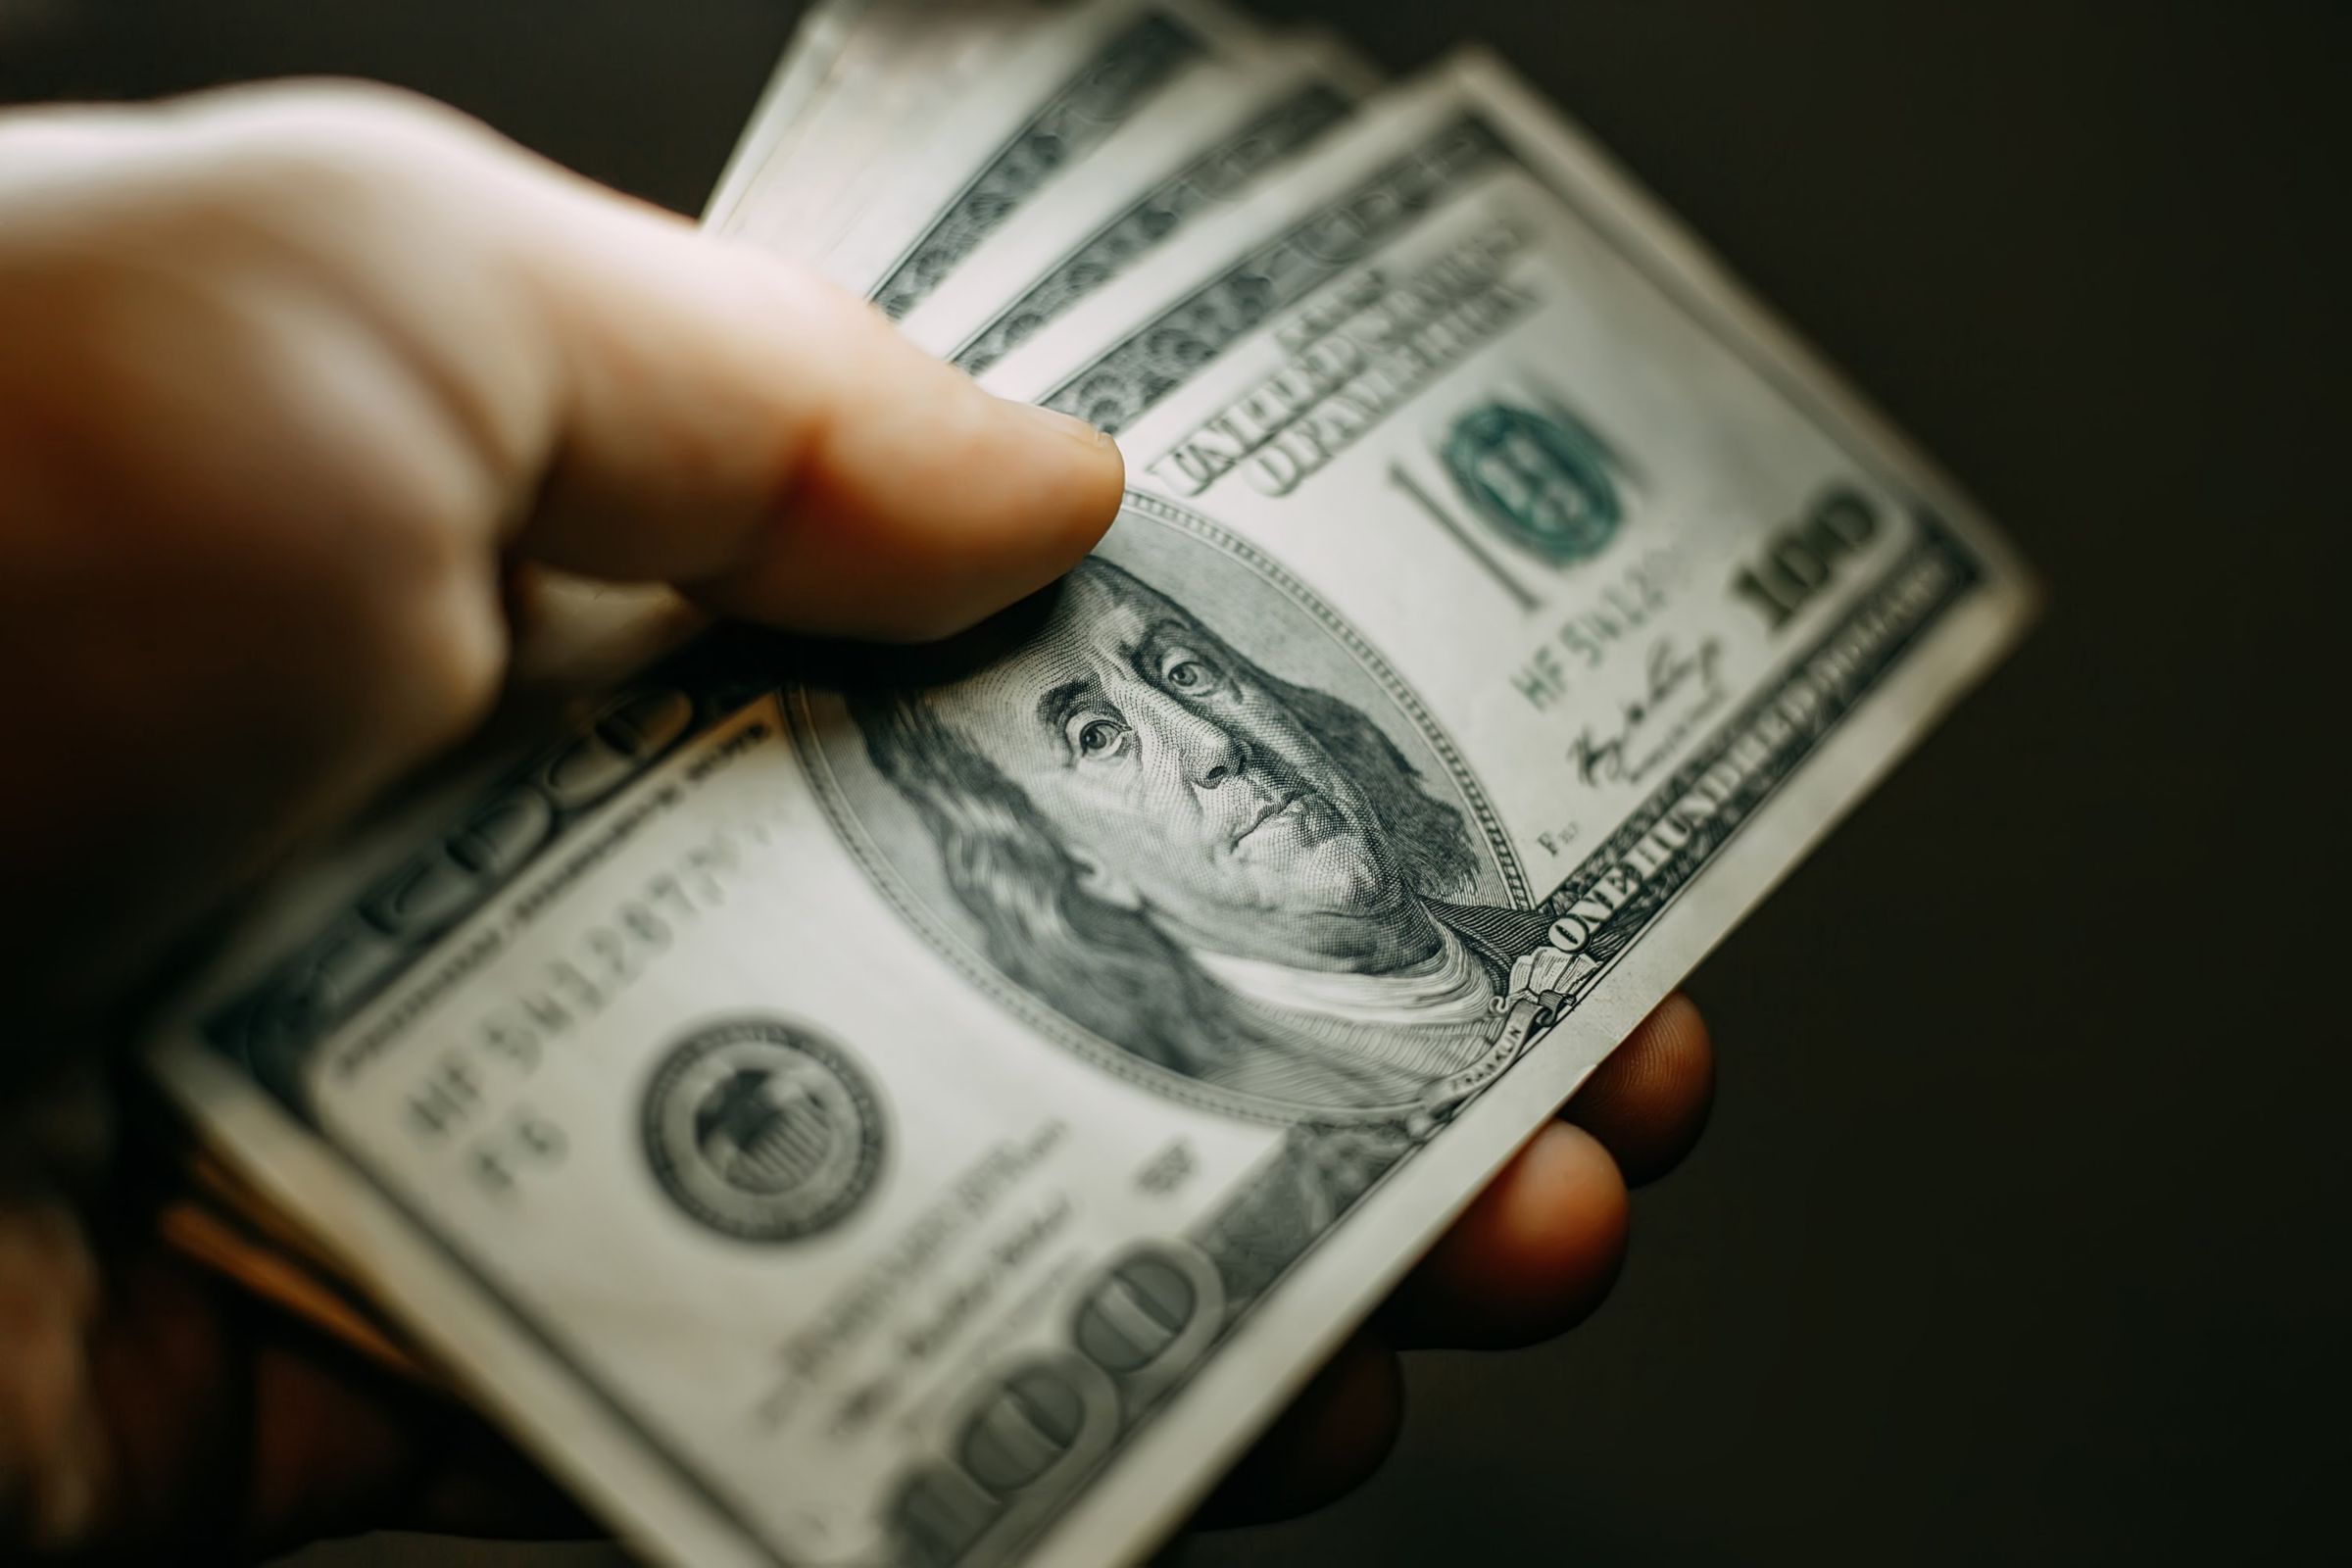 Close up image a man's hand holding cash 